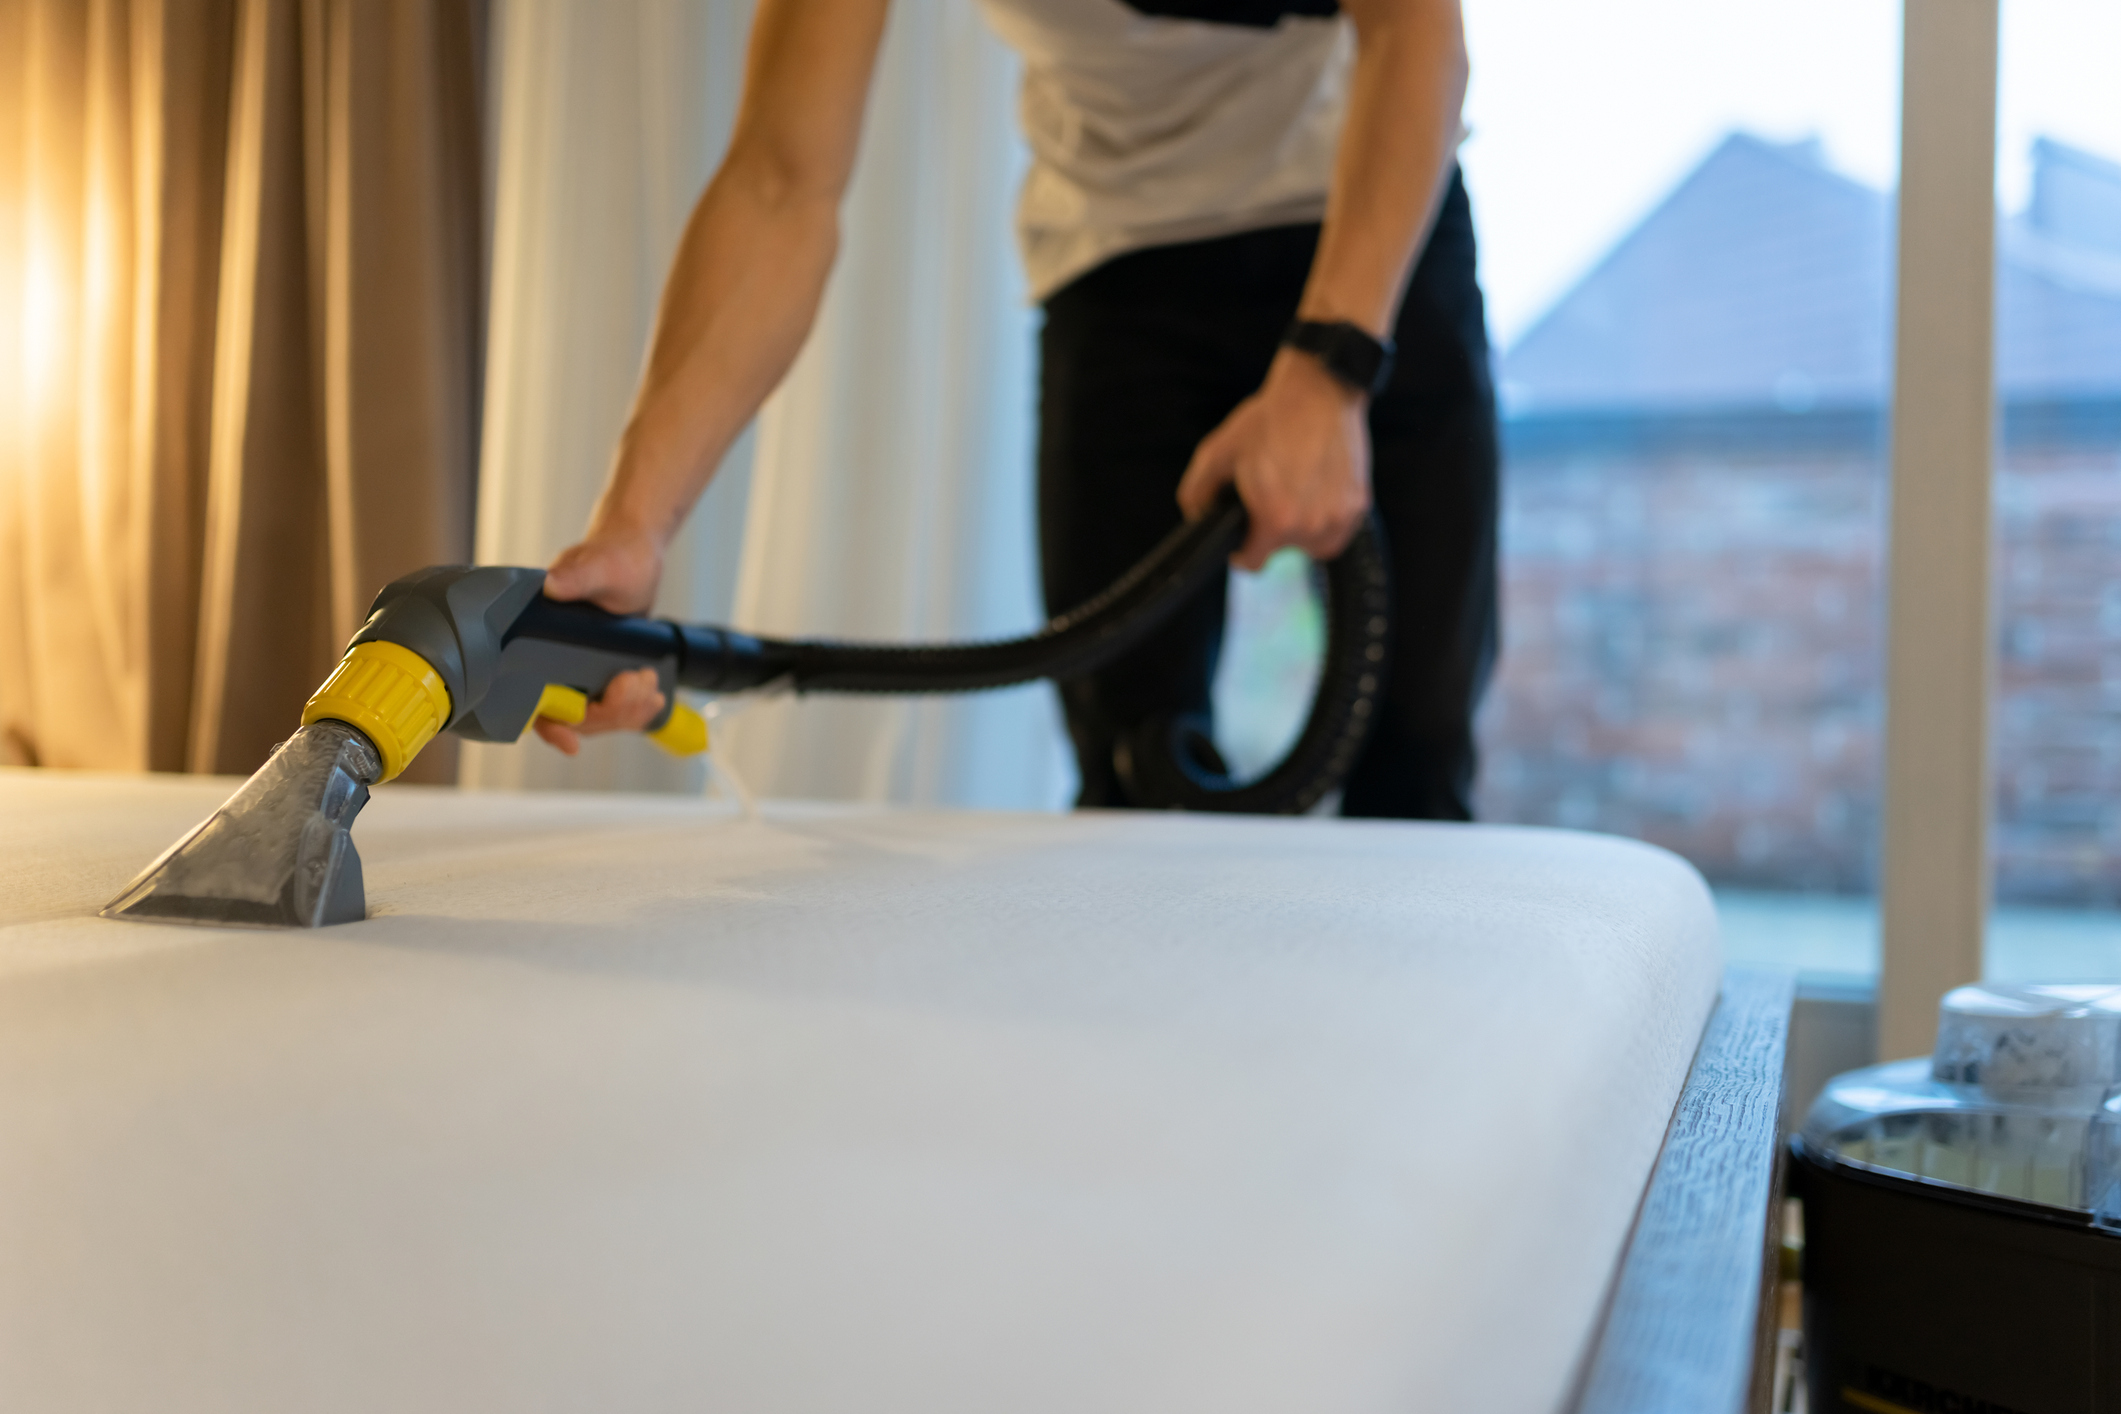 How to Clean Your Pillow Top Mattress